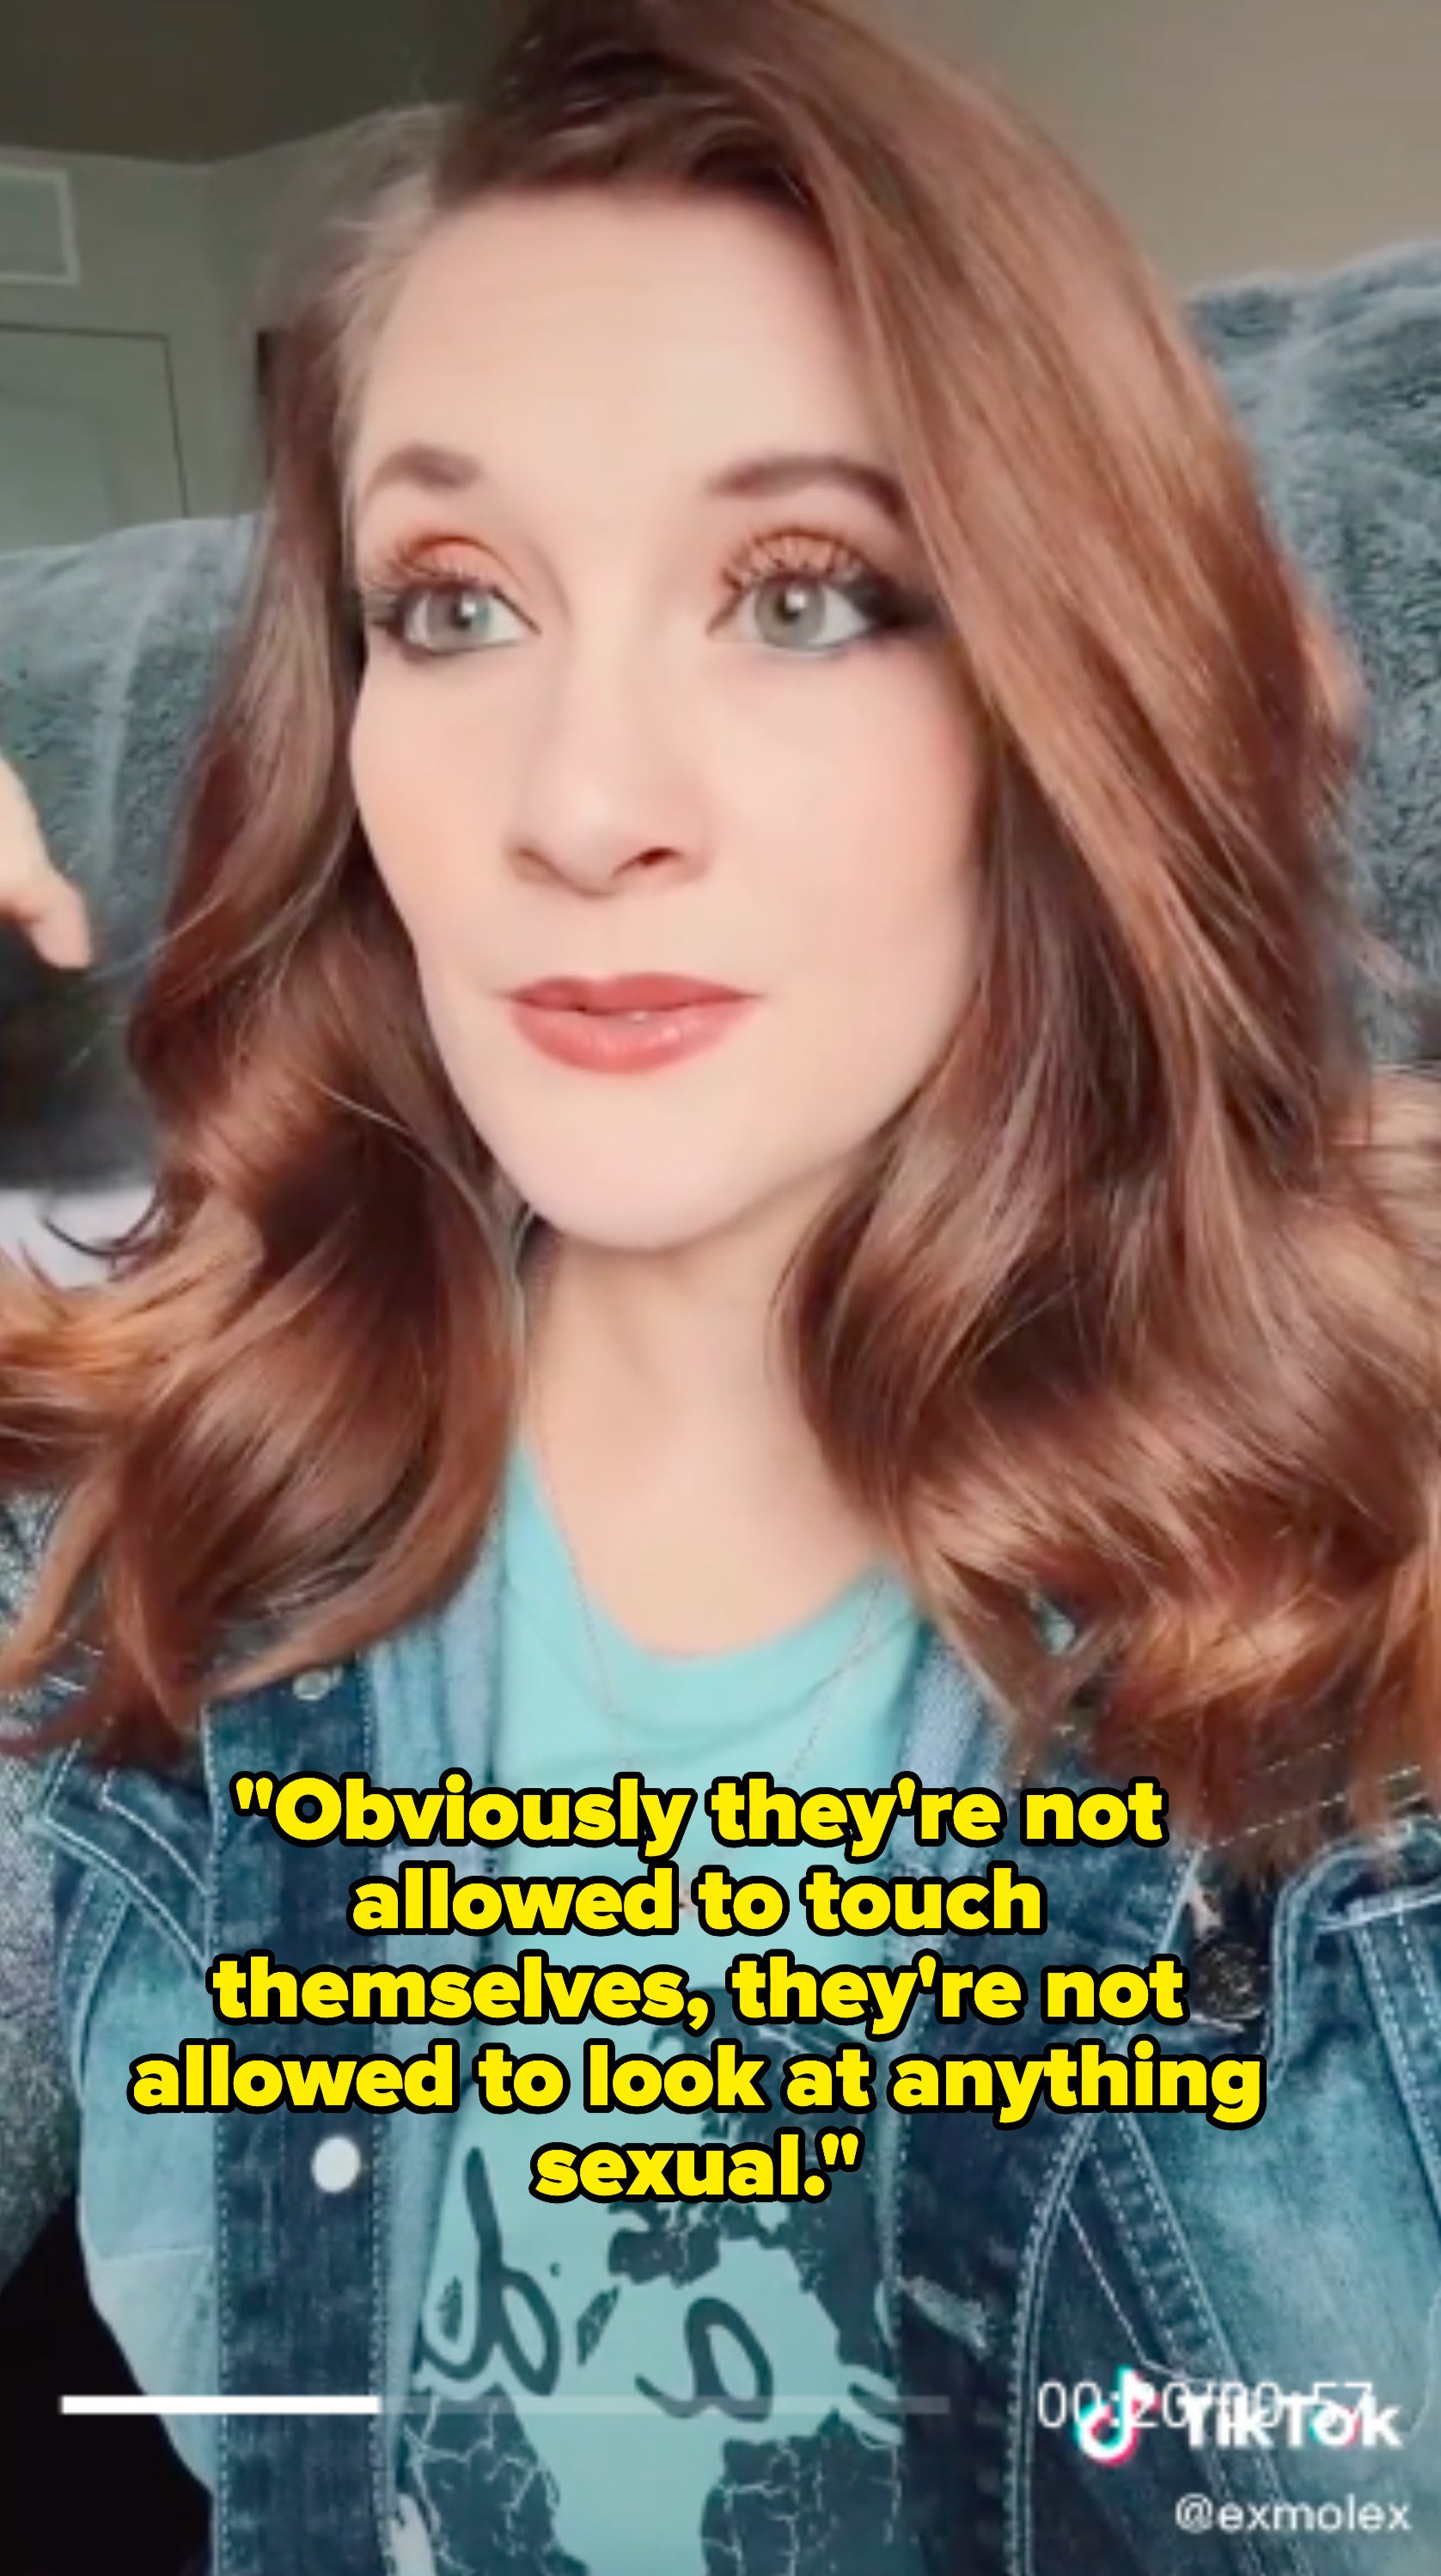 Lexi says &quot;Obviously they&#x27;re not allowed to touch themselves, they&#x27;re not allowed to look at anything sexual&quot;